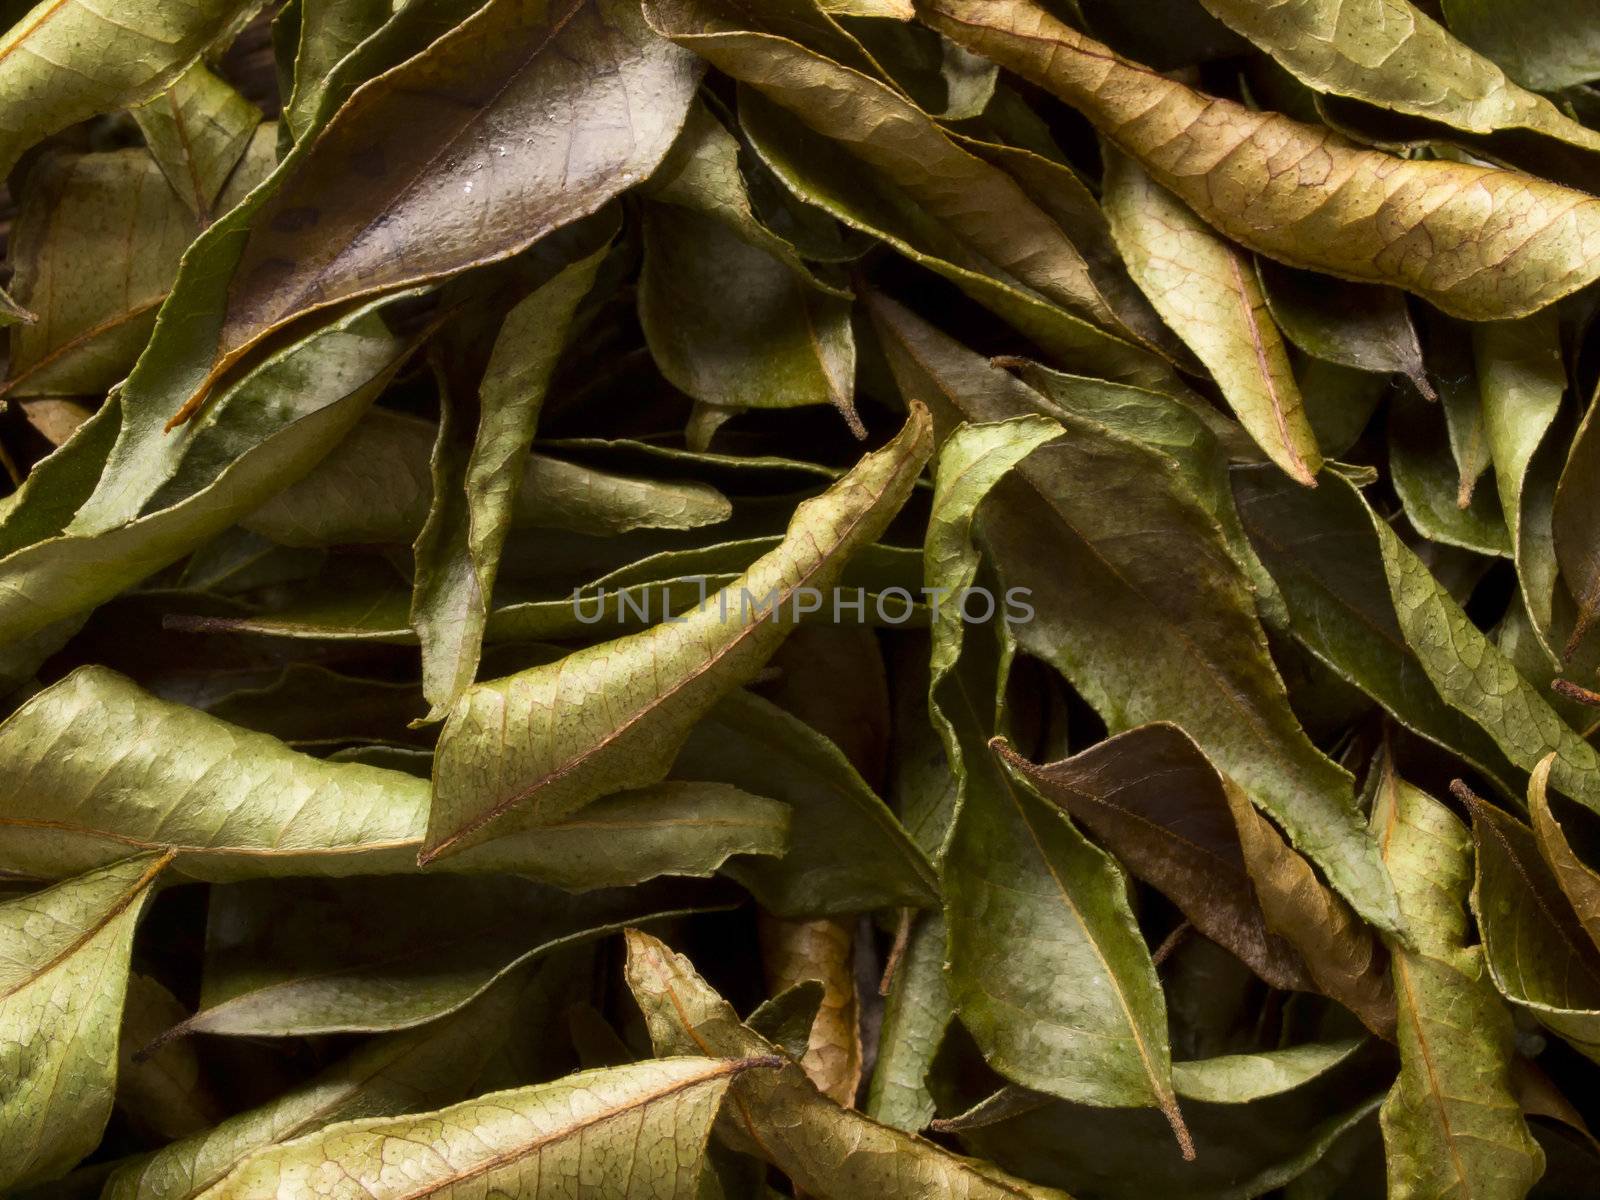 dried curry leaves by zkruger